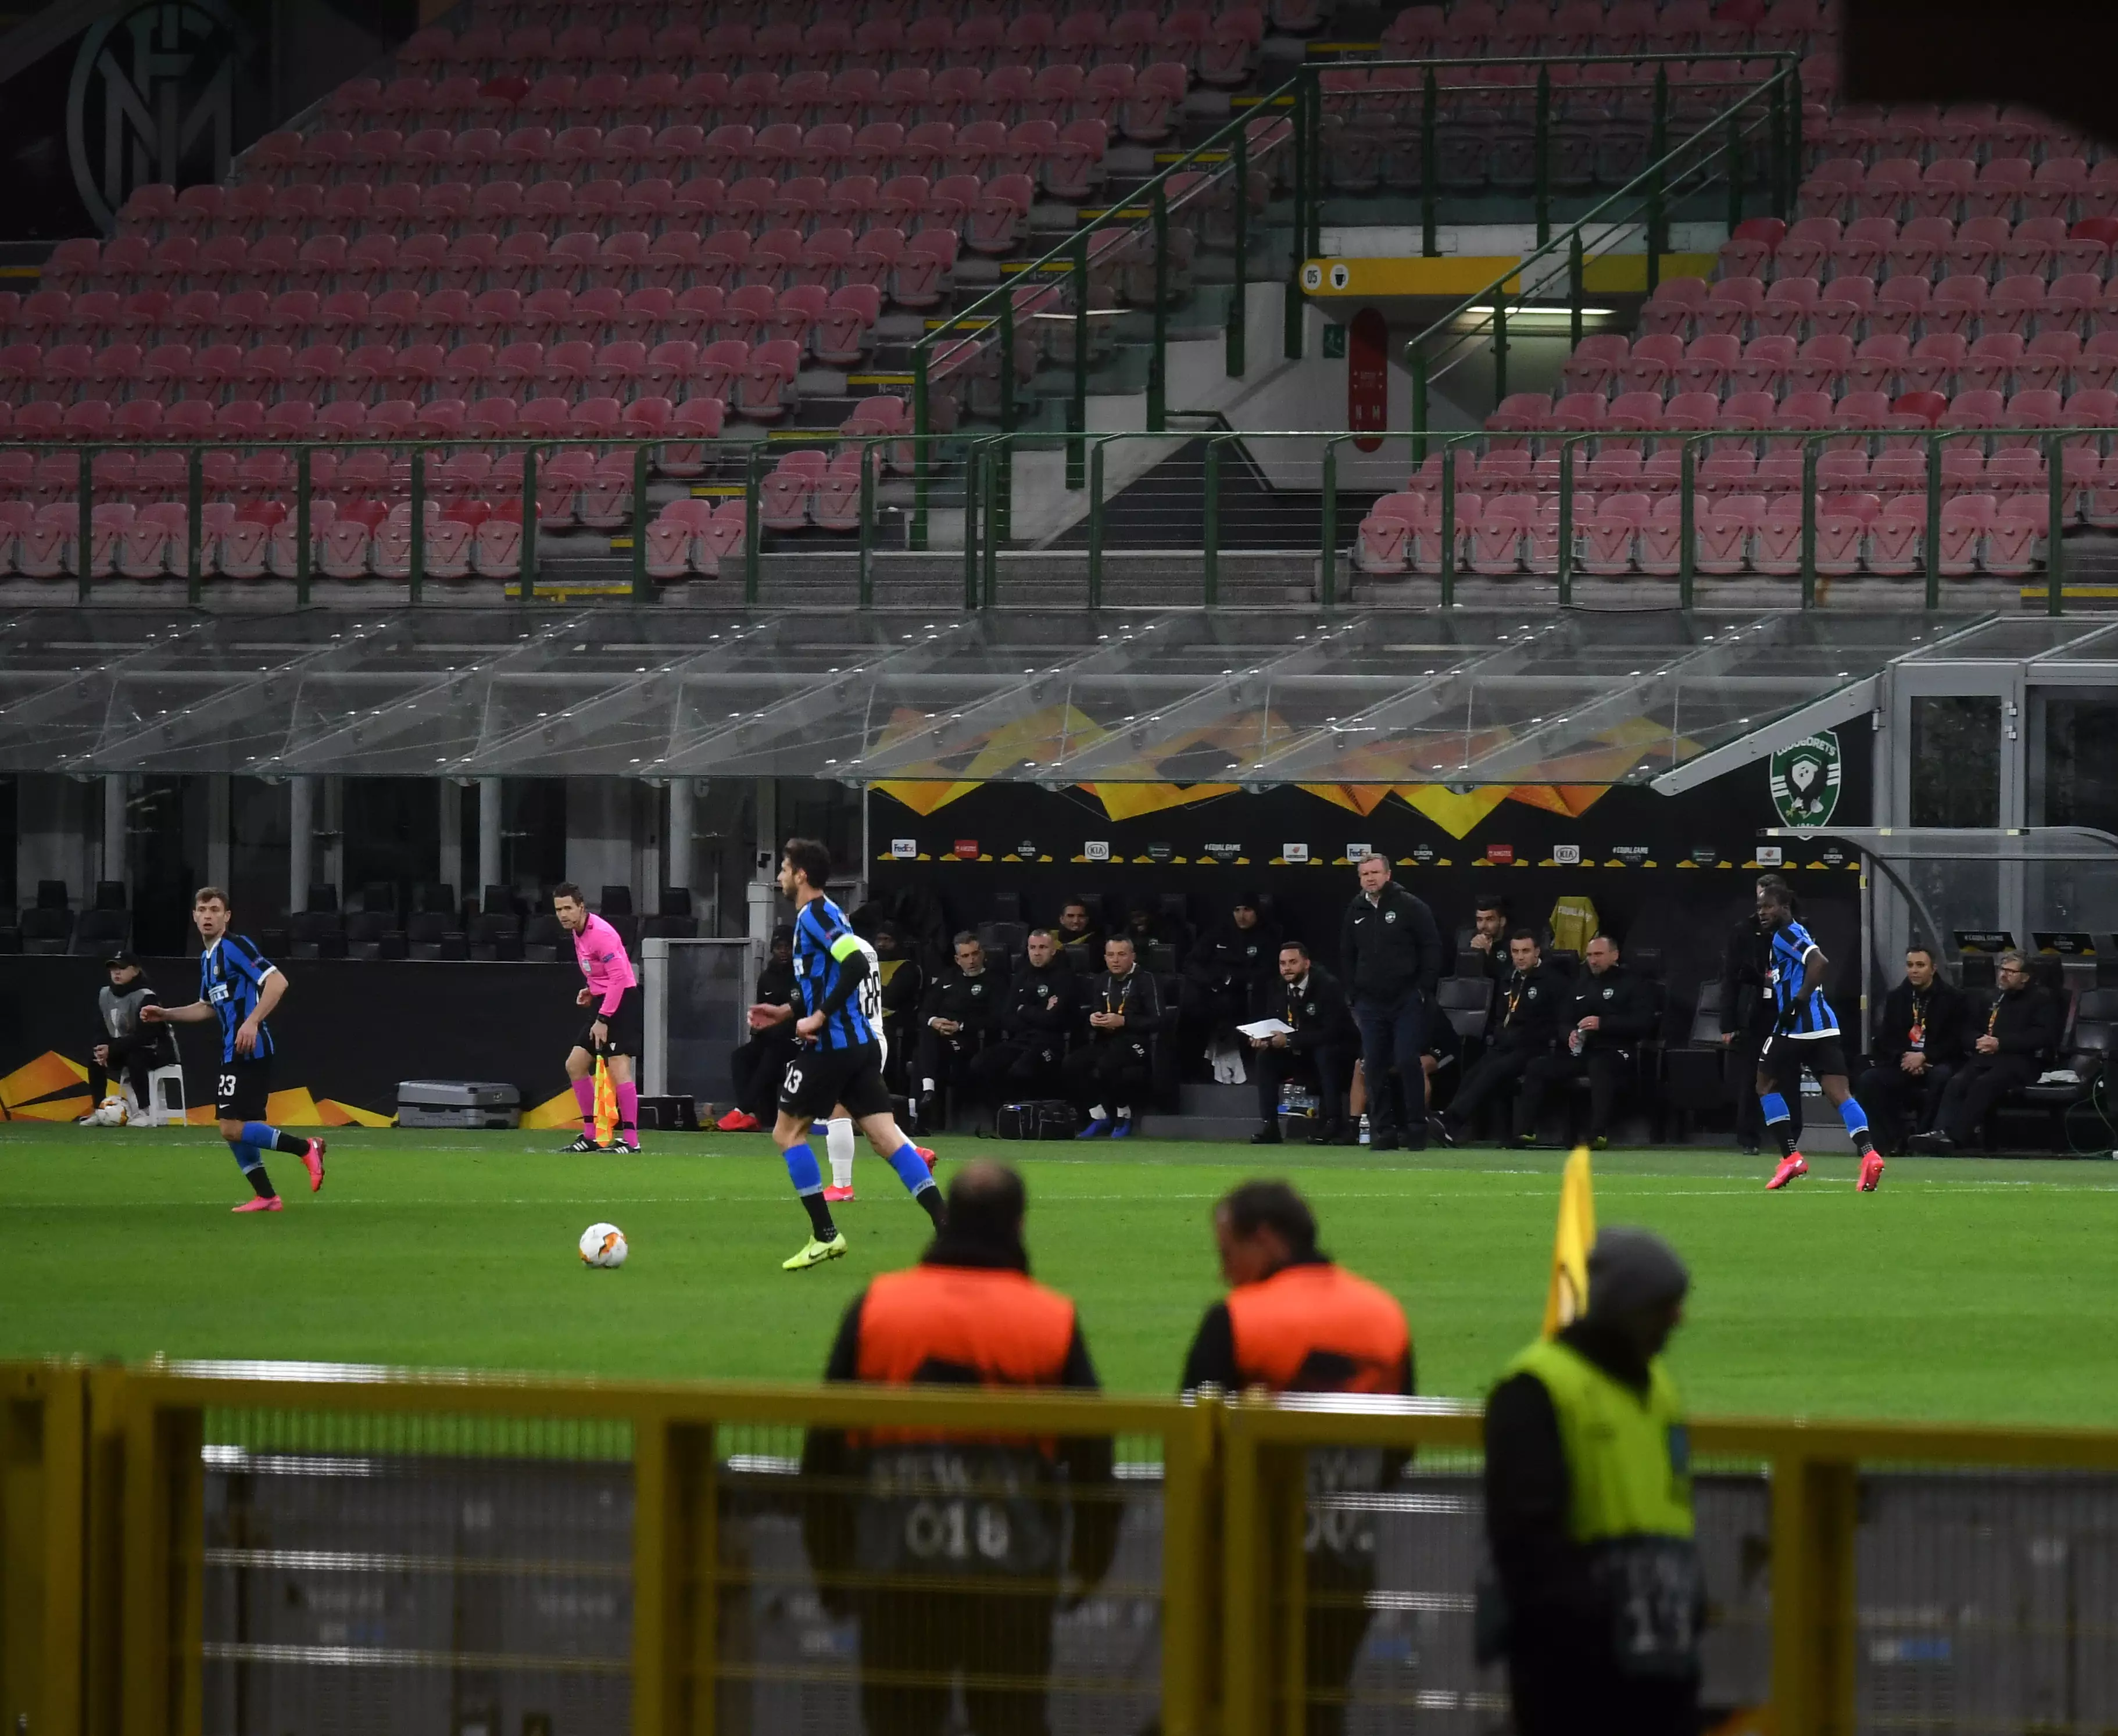 Inter's game at the San Siro on Thursday night was behind closed doors. (Image